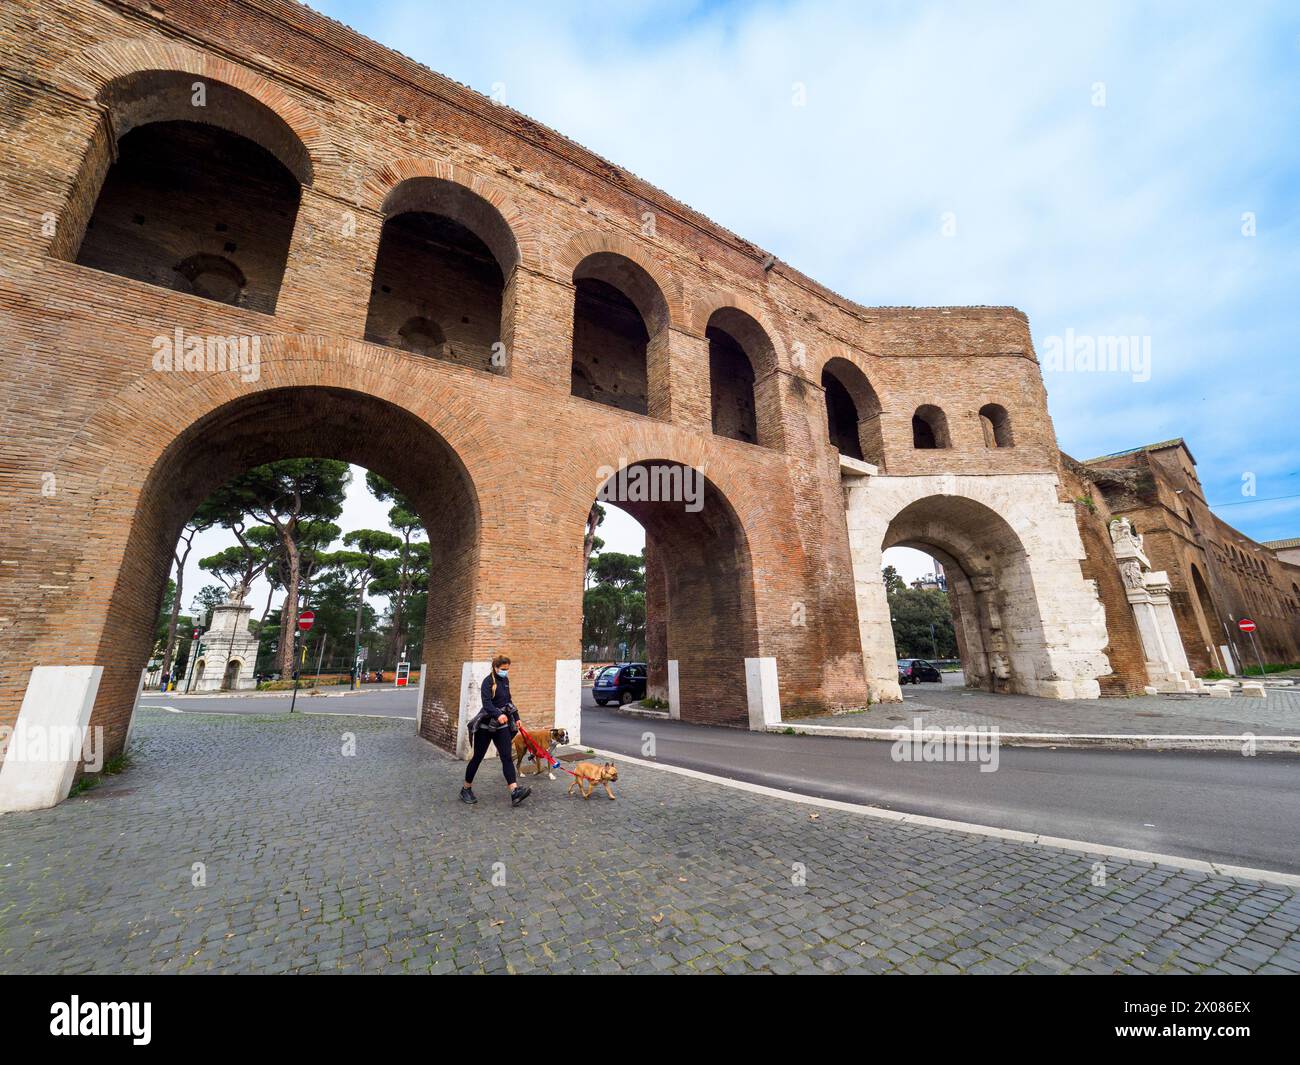 Internal view of Porta Pinciana, a gate of the Aurelian Walls in Rome. The name derives from the gens Pincia, who owned the eponymous hill (Pincian Hill) - Rome, Italy Stock Photo